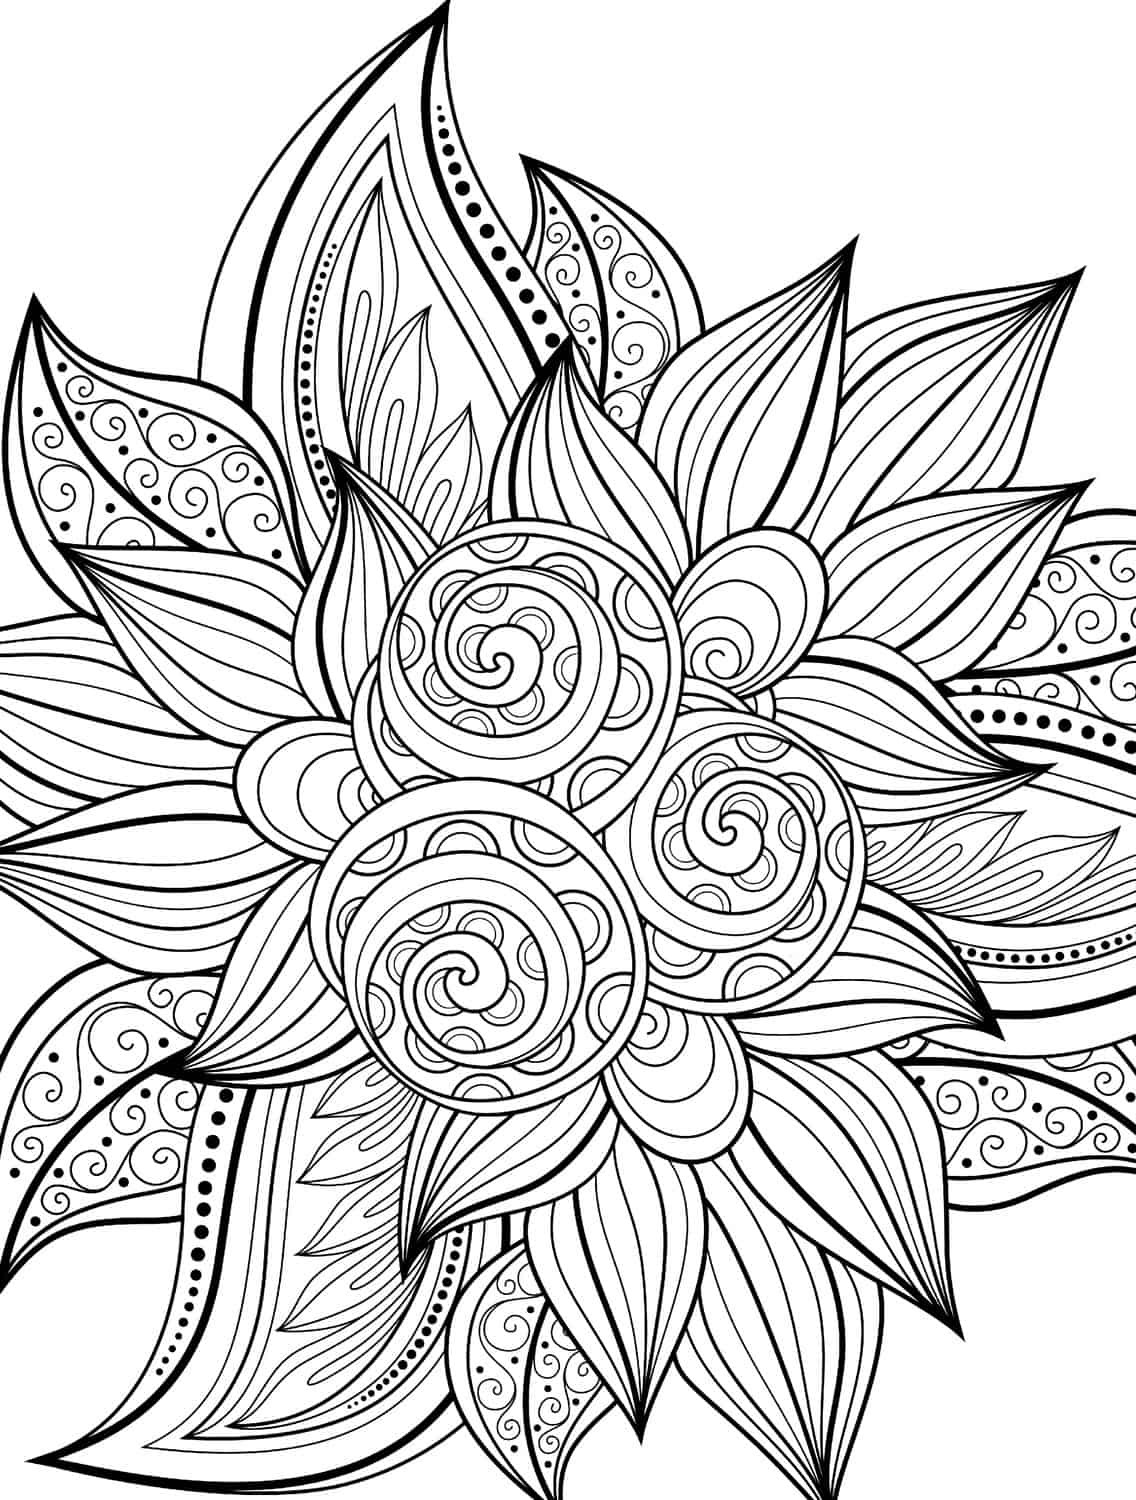 Printable Coloring Pages For Adults
 10 Free Printable Holiday Adult Coloring Pages